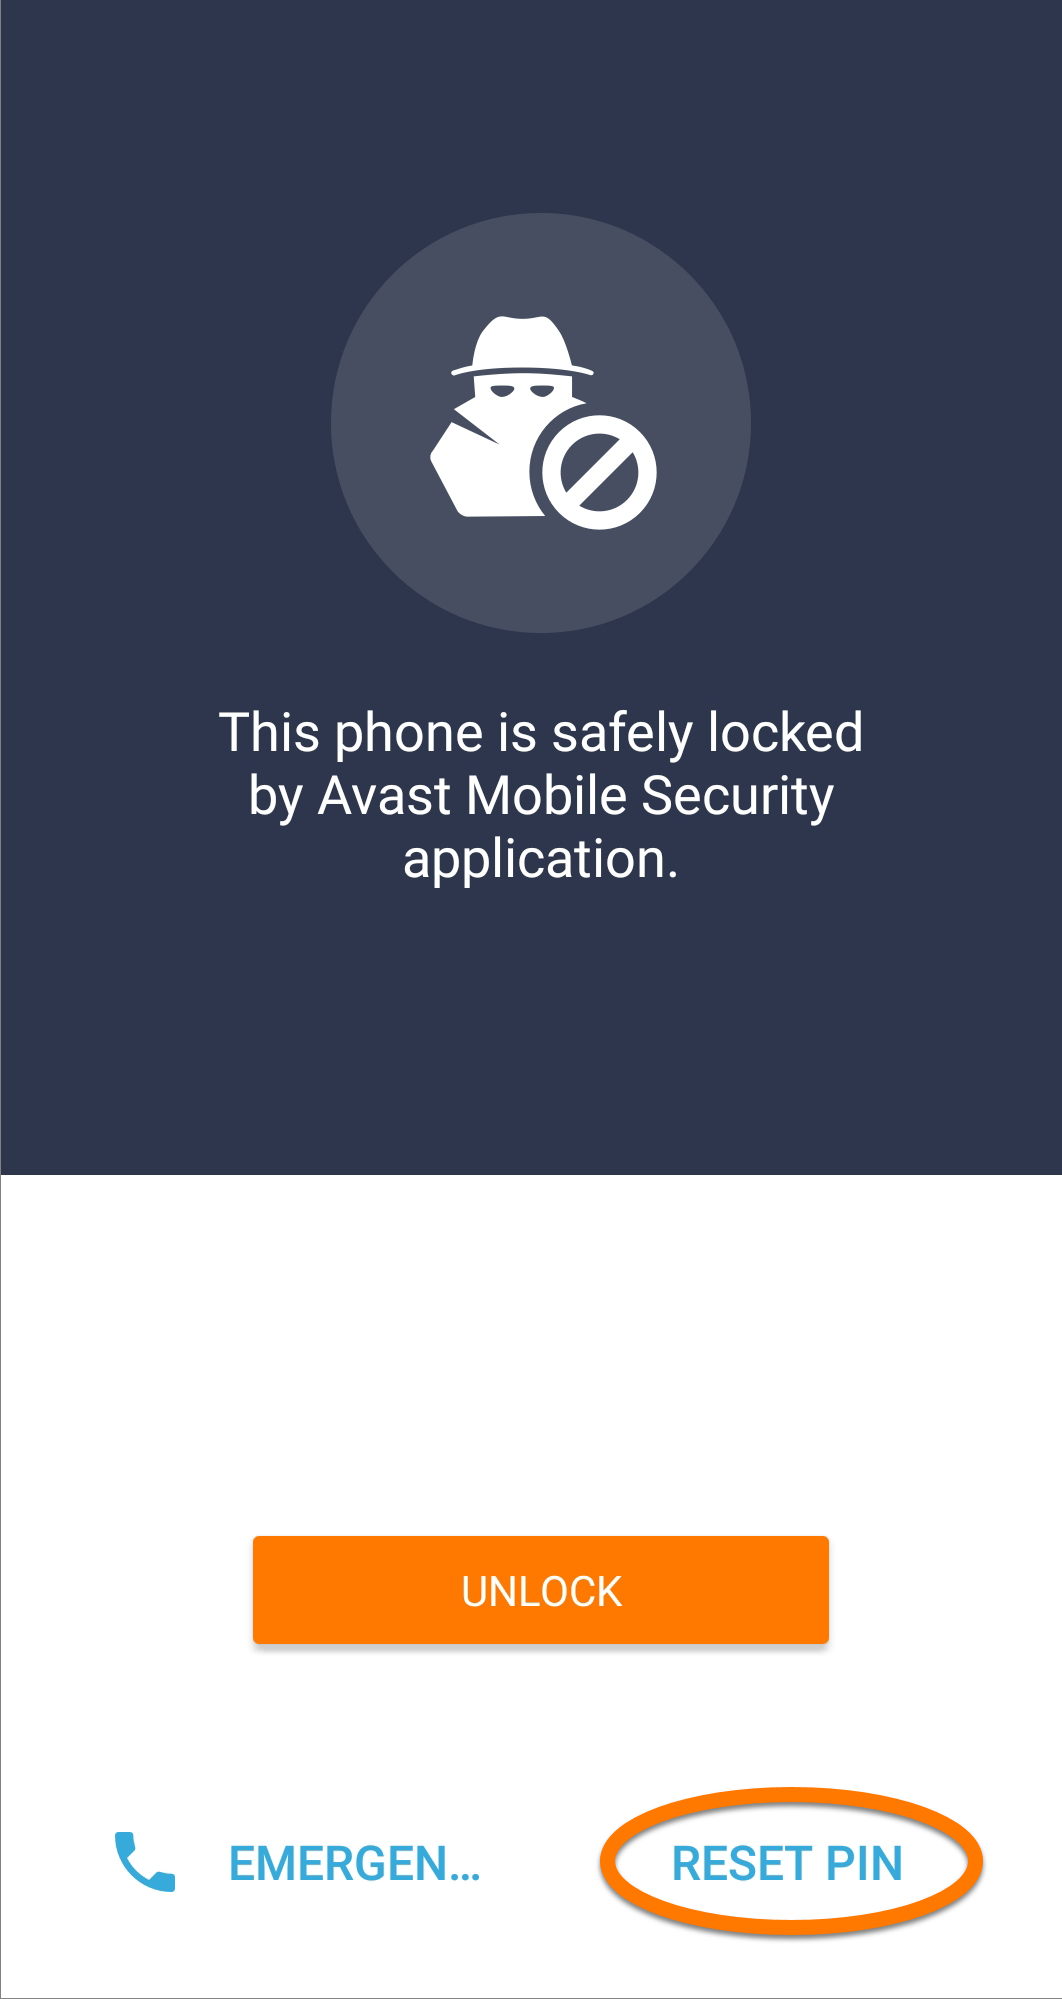 Resetting The Avast Pin For Anti Theft In Avast Mobile Security Avast